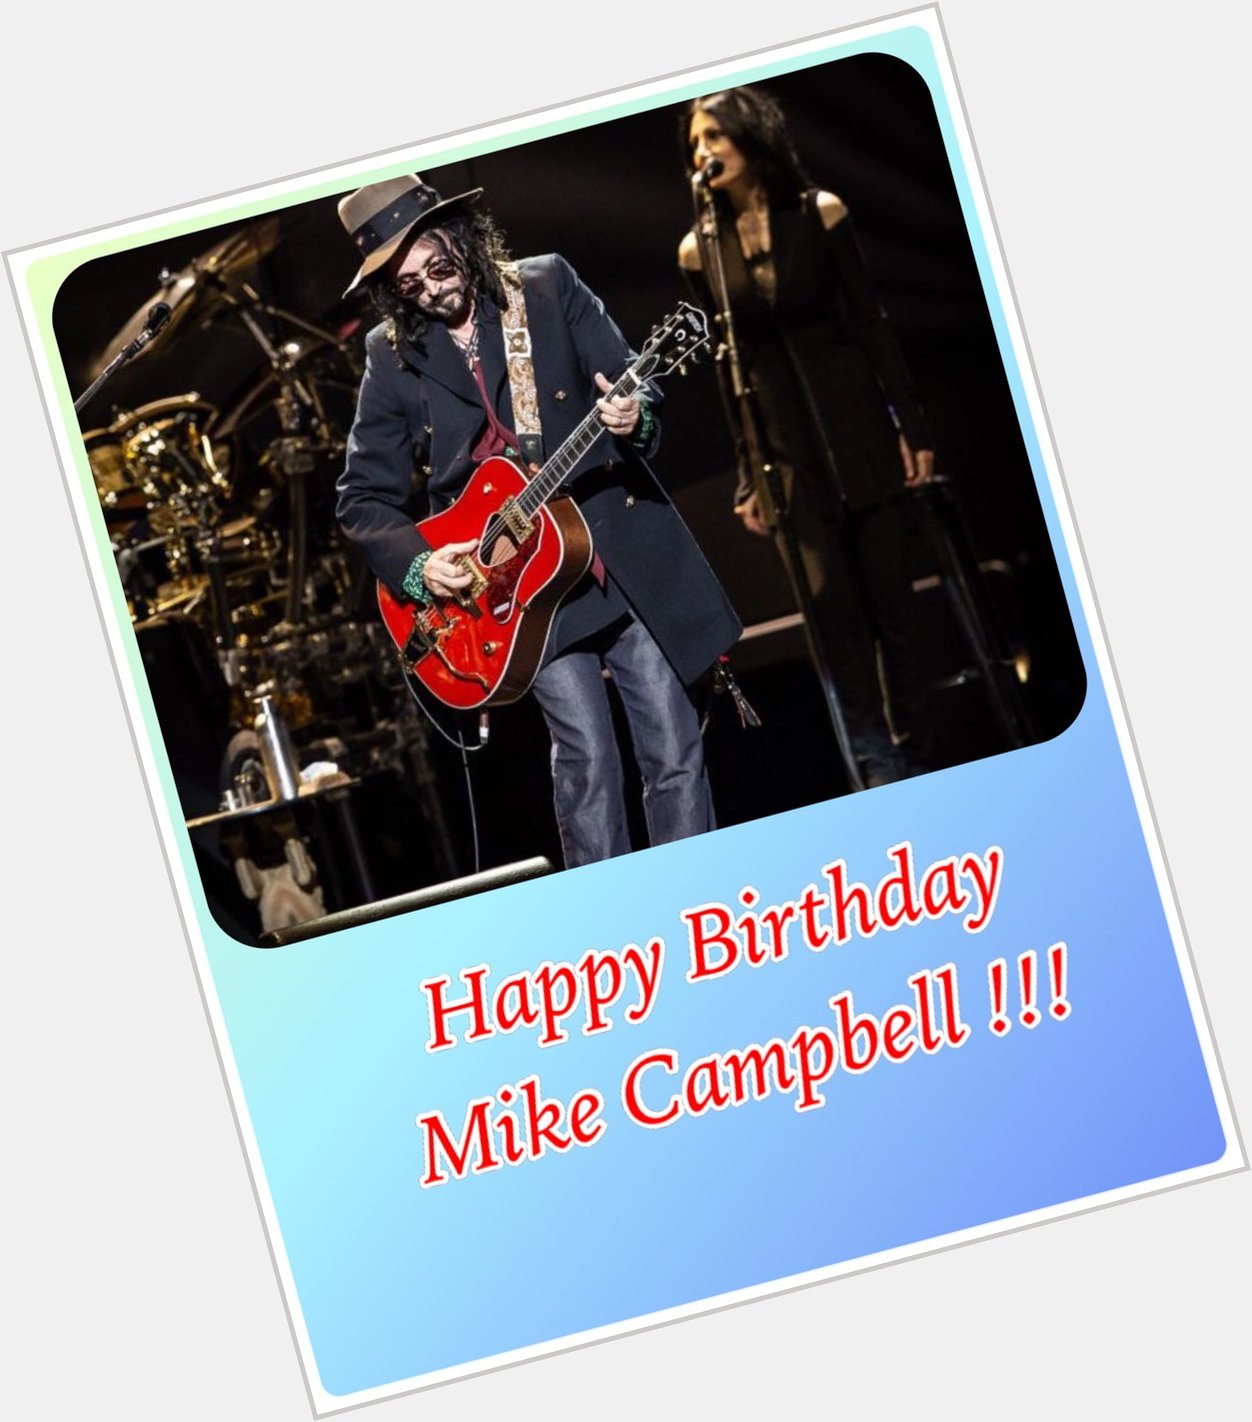 Happy Birthday Mike Campbell!!! We love you  Hope you have a wonderful day!   